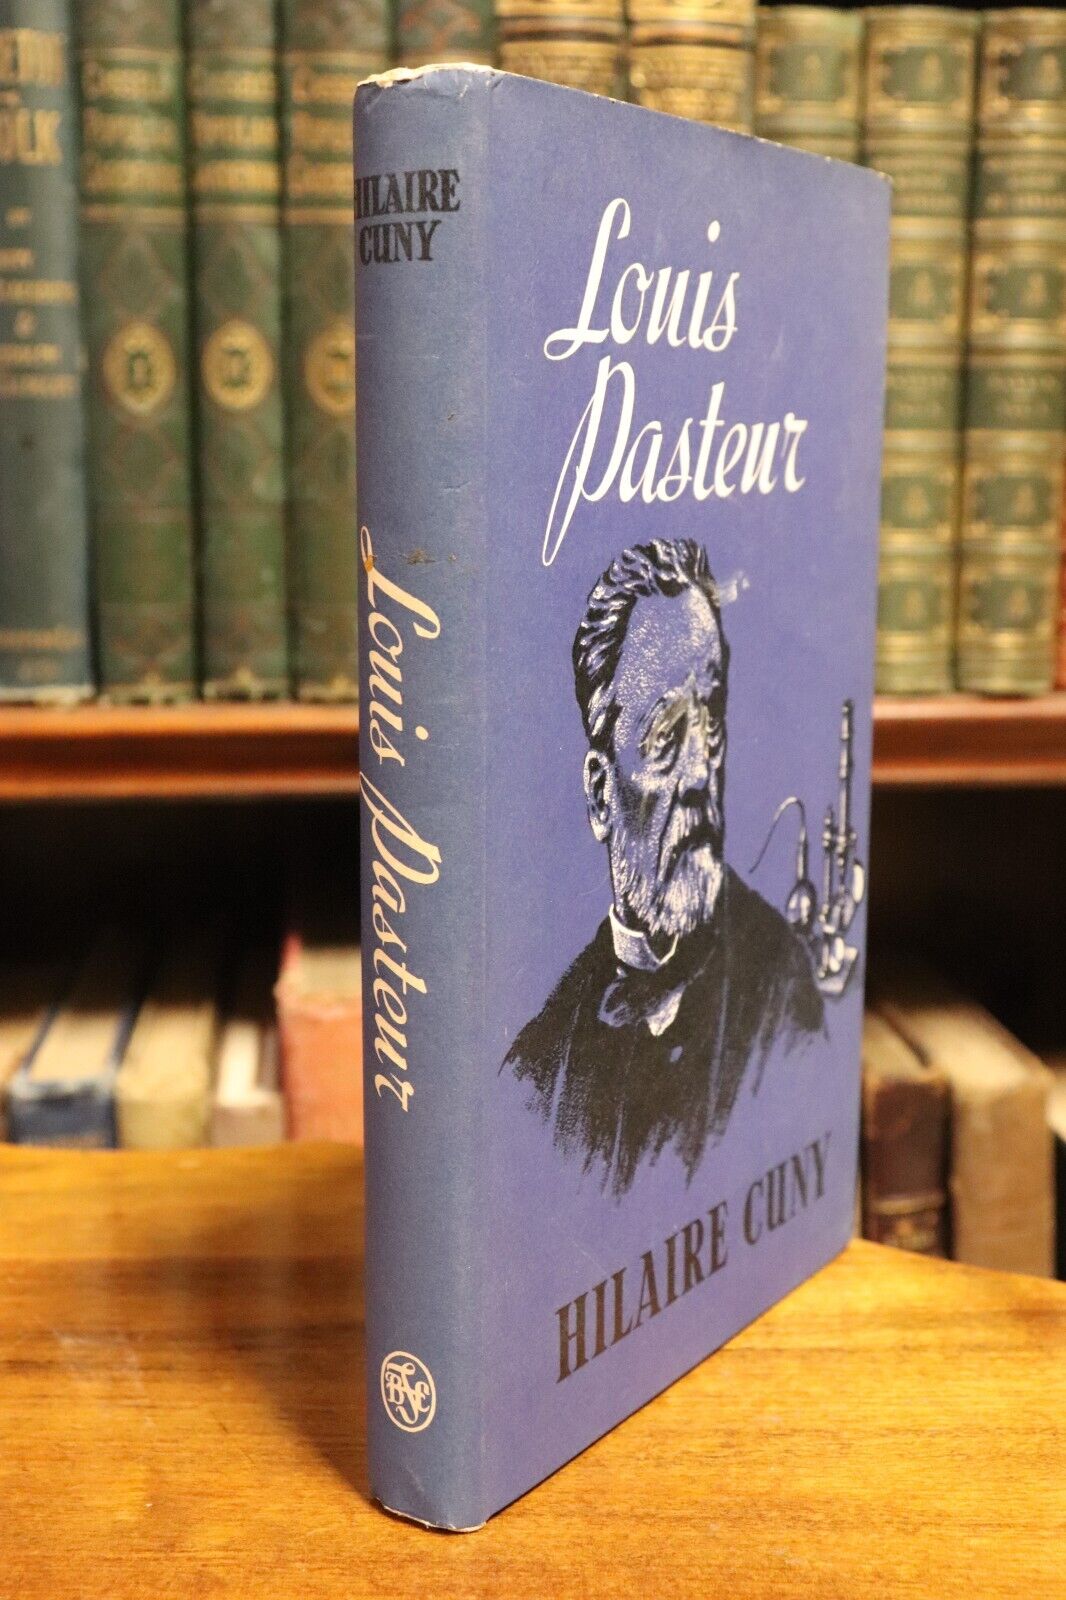 Louis Pasteur: The Man & His Theories by H Cuny - 1965 - Vintage Science Book